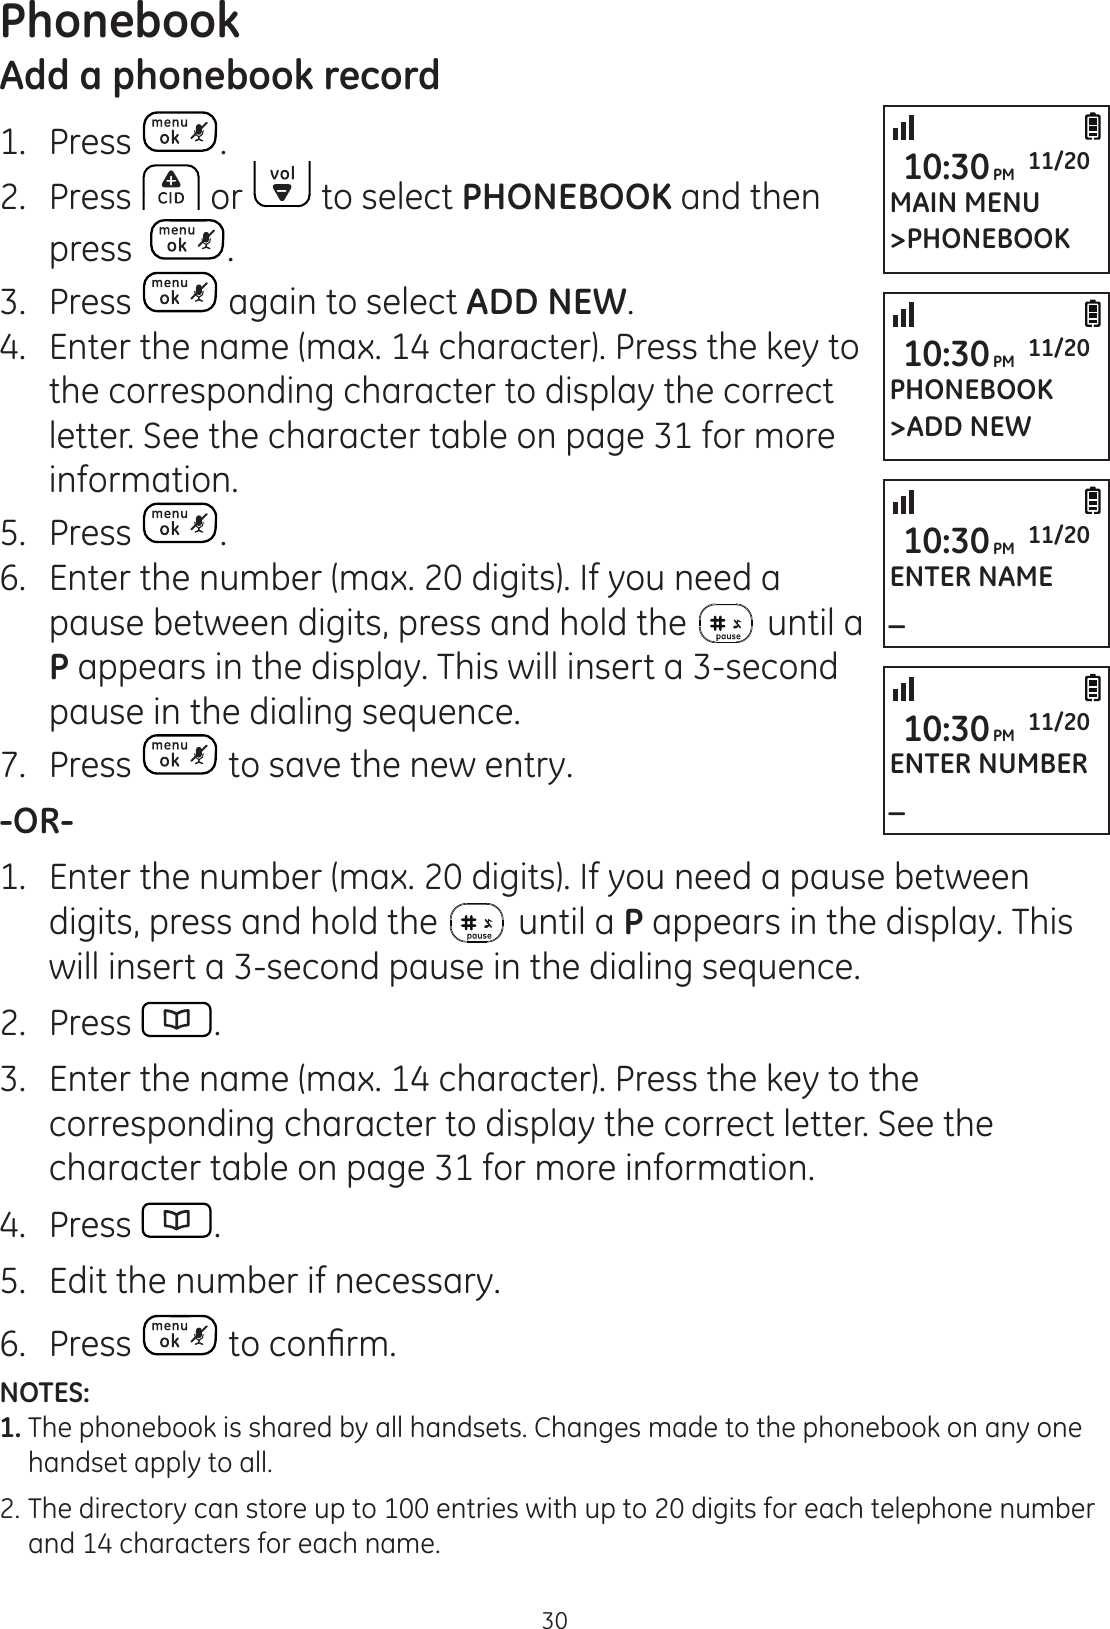 30PhonebookAdd a phonebook record1.  Press .2.  Press   or   to select PHONEBOOK and then press   .3.  Press   again to select ADD NEW.4.  Enter the name (max. 14 character). Press the key to the corresponding character to display the correct letter. See the character table on page 31 for more information. 5.  Press  .6.  Enter the number (max. 20 digits). If you need a pause between digits, press and hold the   until a P appears in the display. This will insert a 3-second pause in the dialing sequence. 7.  Press   to save the new entry. -OR-1.  Enter the number (max. 20 digits). If you need a pause between digits, press and hold the   until a P appears in the display. This will insert a 3-second pause in the dialing sequence.2.  Press  .3.  Enter the name (max. 14 character). Press the key to the corresponding character to display the correct letter. See the character table on page 31 for more information.  4.  Press  .5.  Edit the number if necessary. 6.  Press  WRFRQ¿UPNOTES: 1. The phonebook is shared by all handsets. Changes made to the phonebook on any one    handset apply to all. 2.  The directory can store up to 100 entries with up to 20 digits for each telephone number    and 14 characters for each name. MAIN MENU&gt;PHONEBOOK10:30PM 11/20PHONEBOOK&gt;ADD NEW10:30PM 11/20ENTER NAME_10:30PM 11/20ENTER NUMBER_10:30PM 11/20